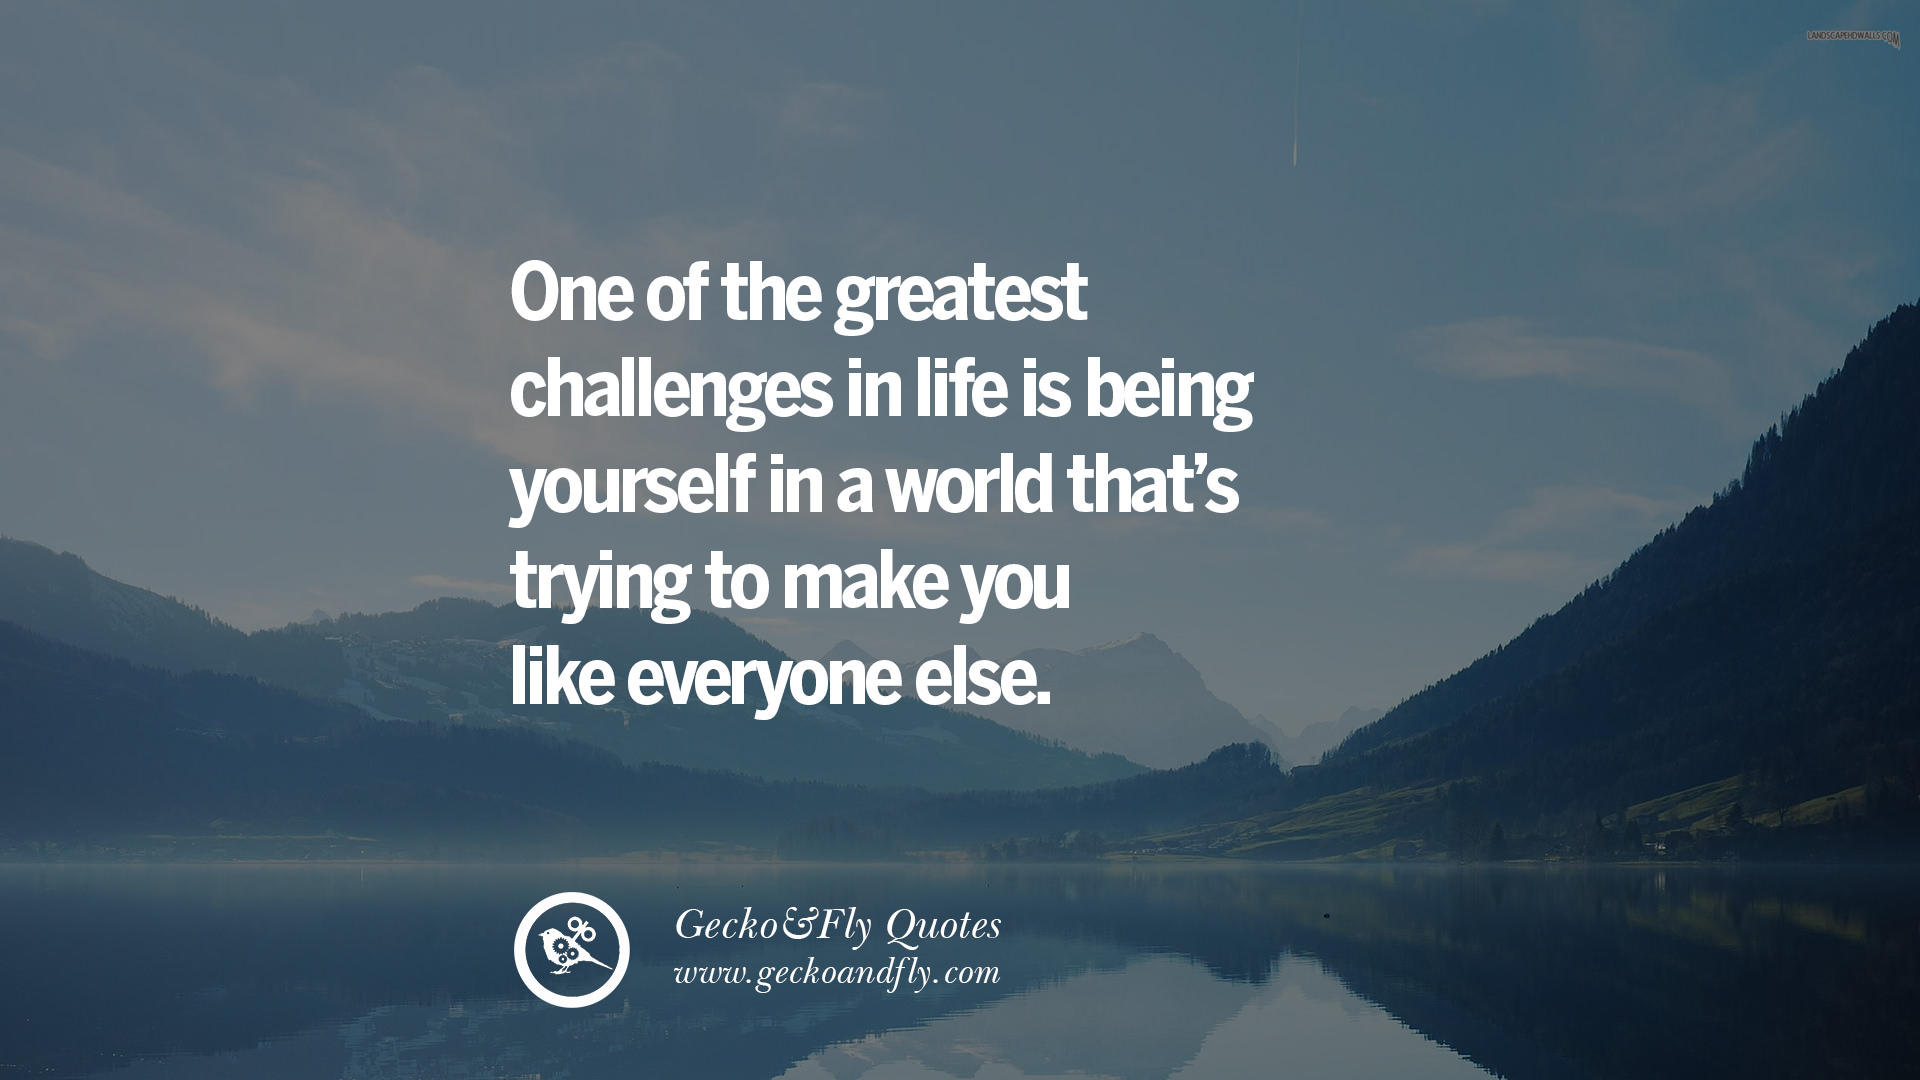 20 Amazing Quotes On Believing In Yourself & Boost Self Confidence